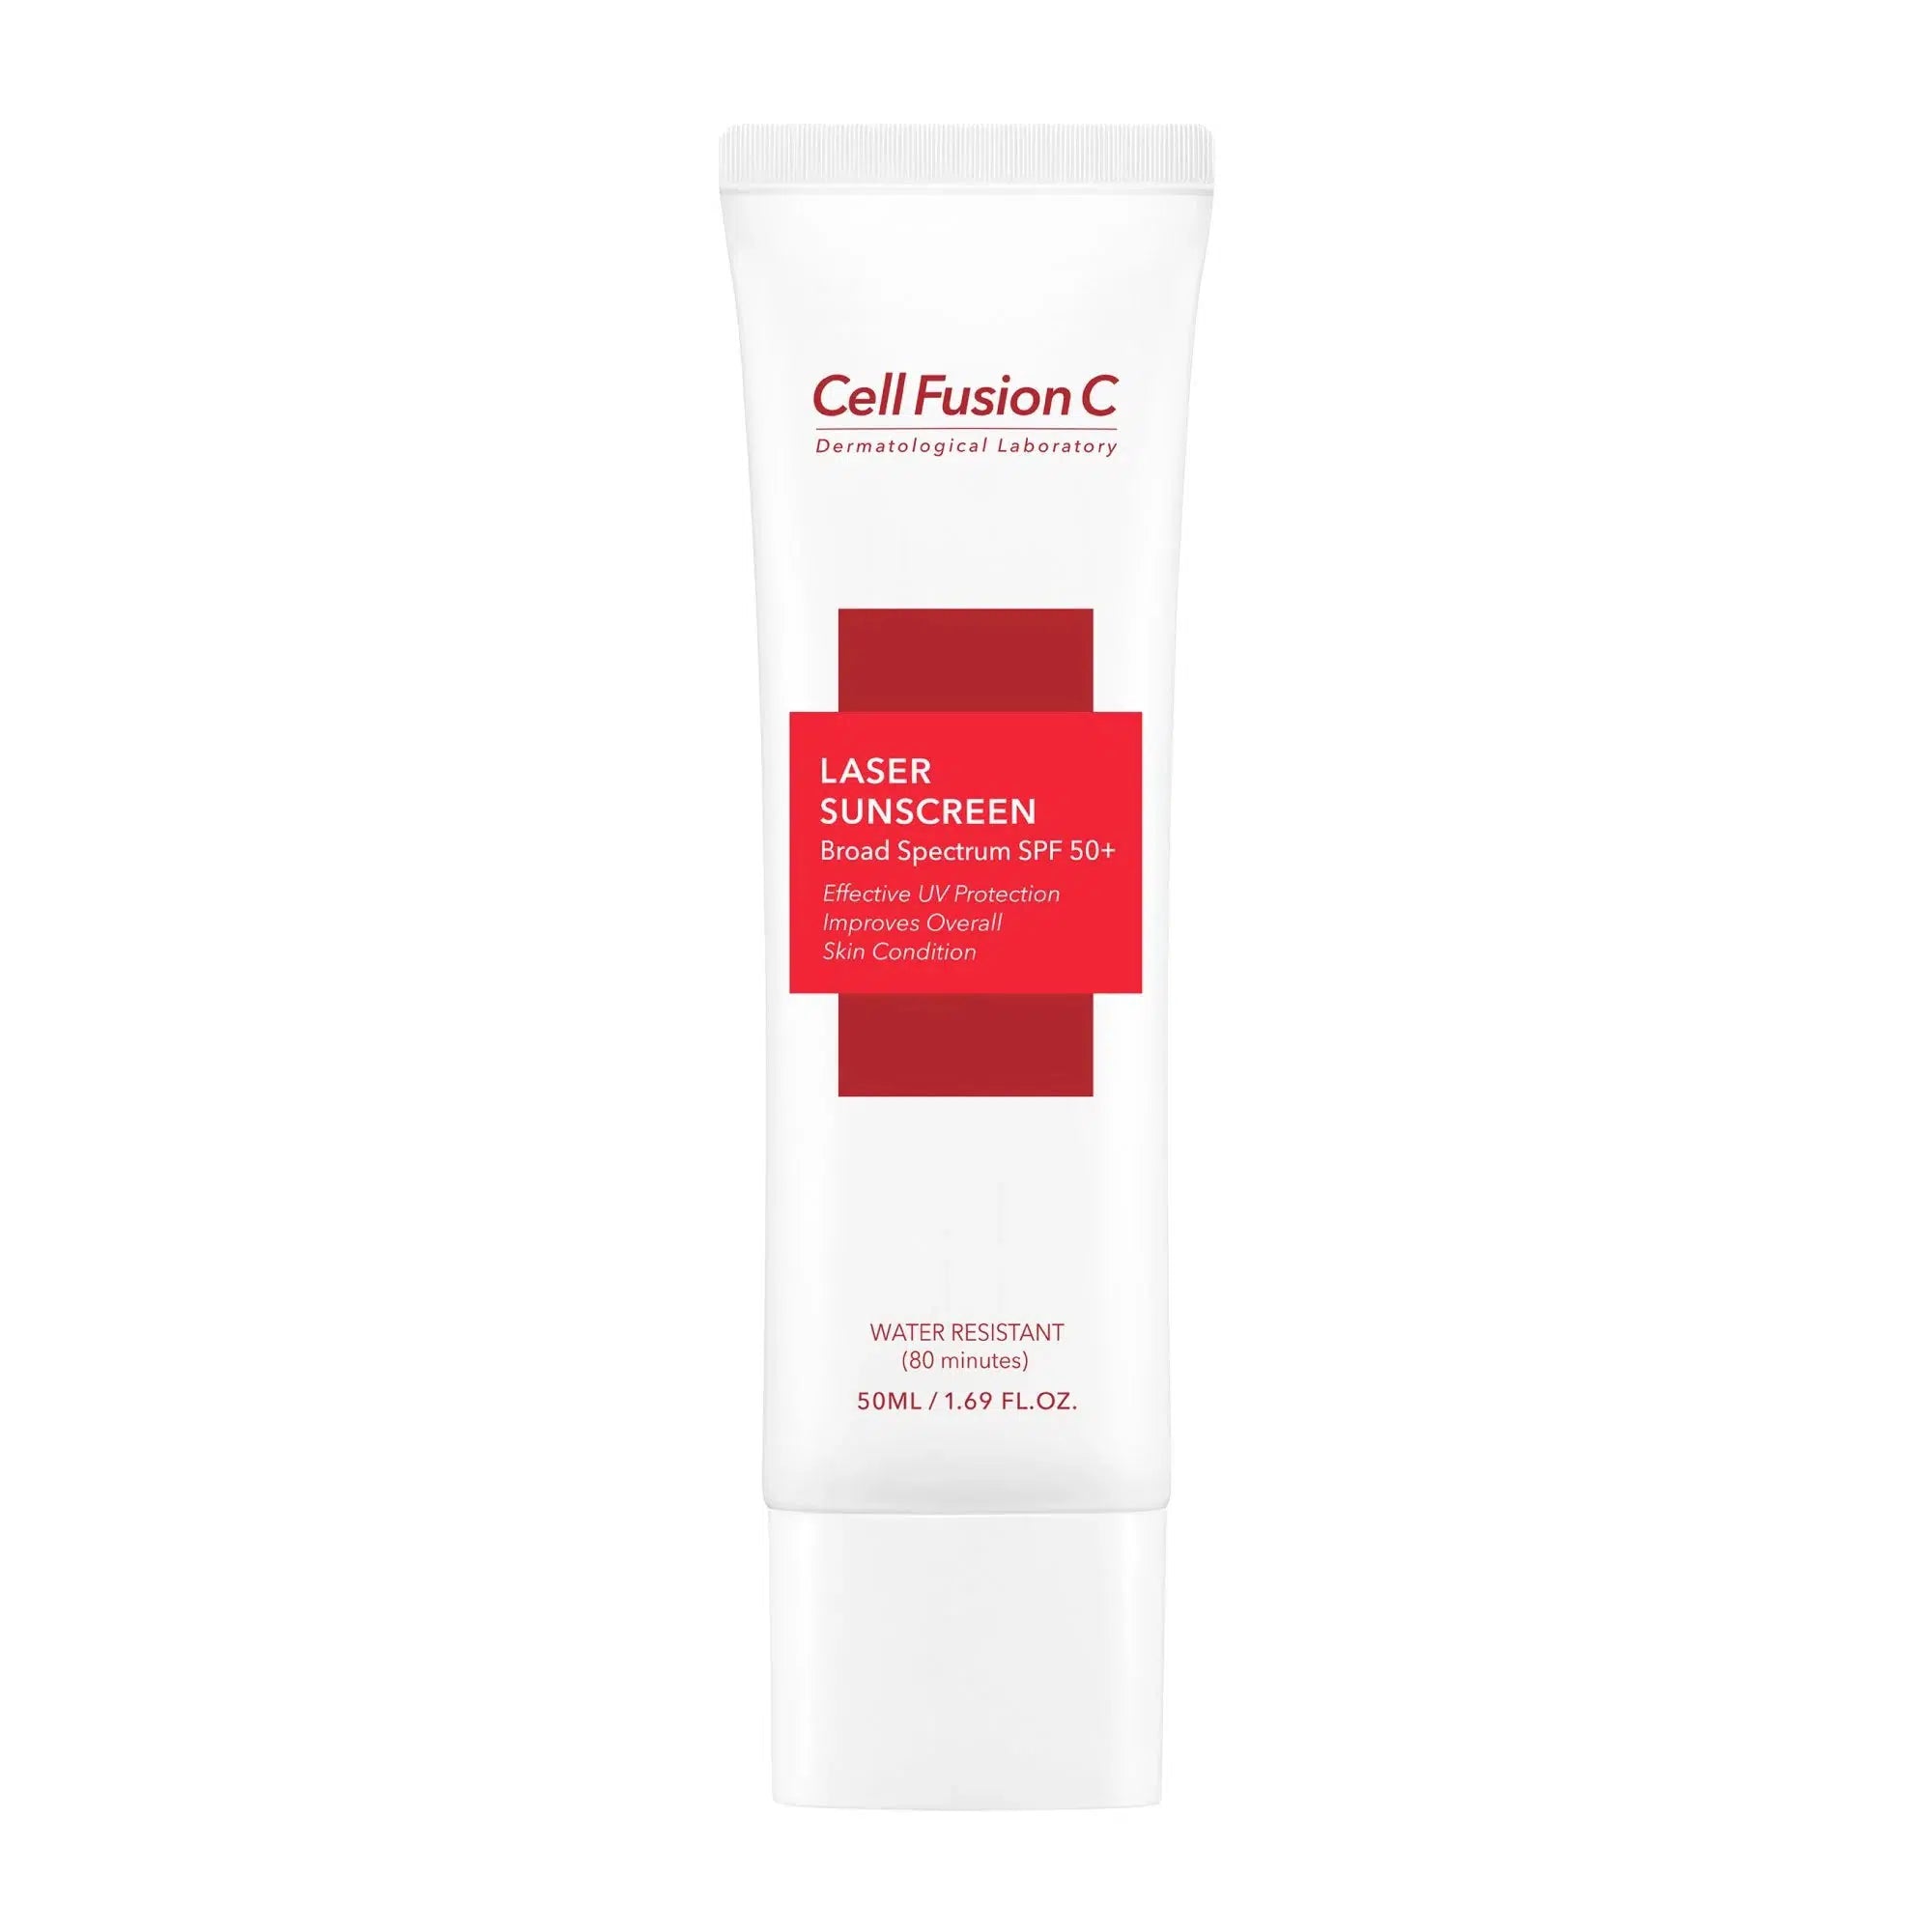 123 CELL FUSION C Laser Sunscreen 35ml - 1